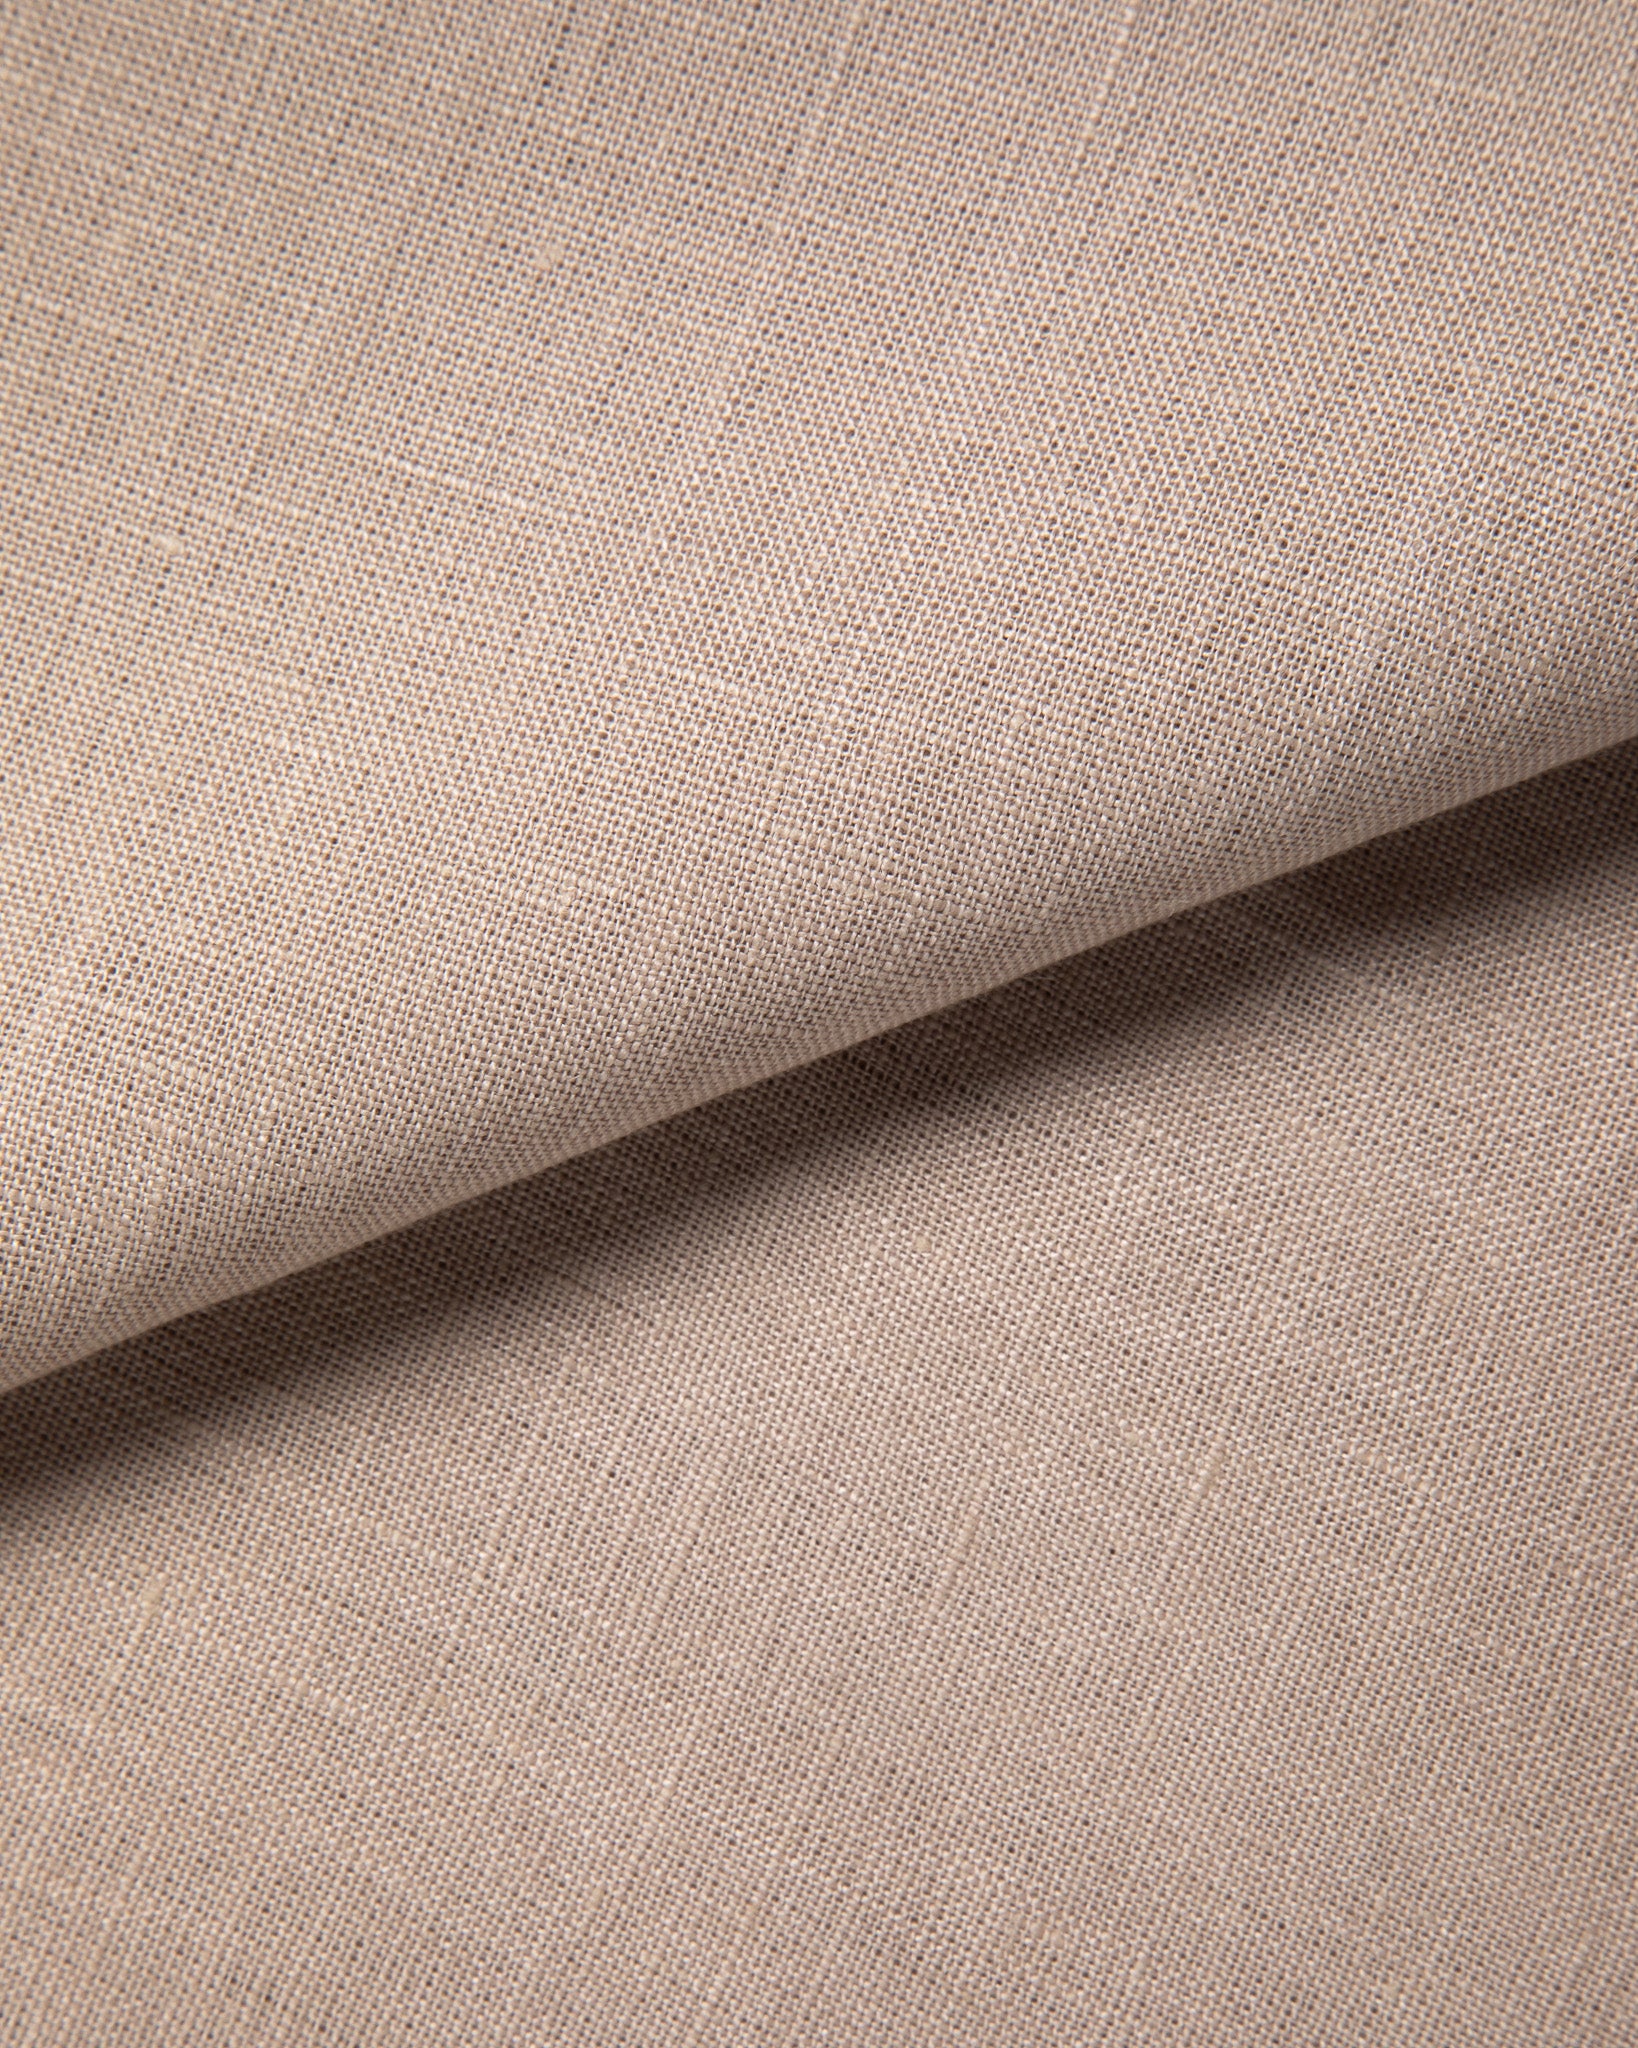 French Clay Linen by Merchant & Mills